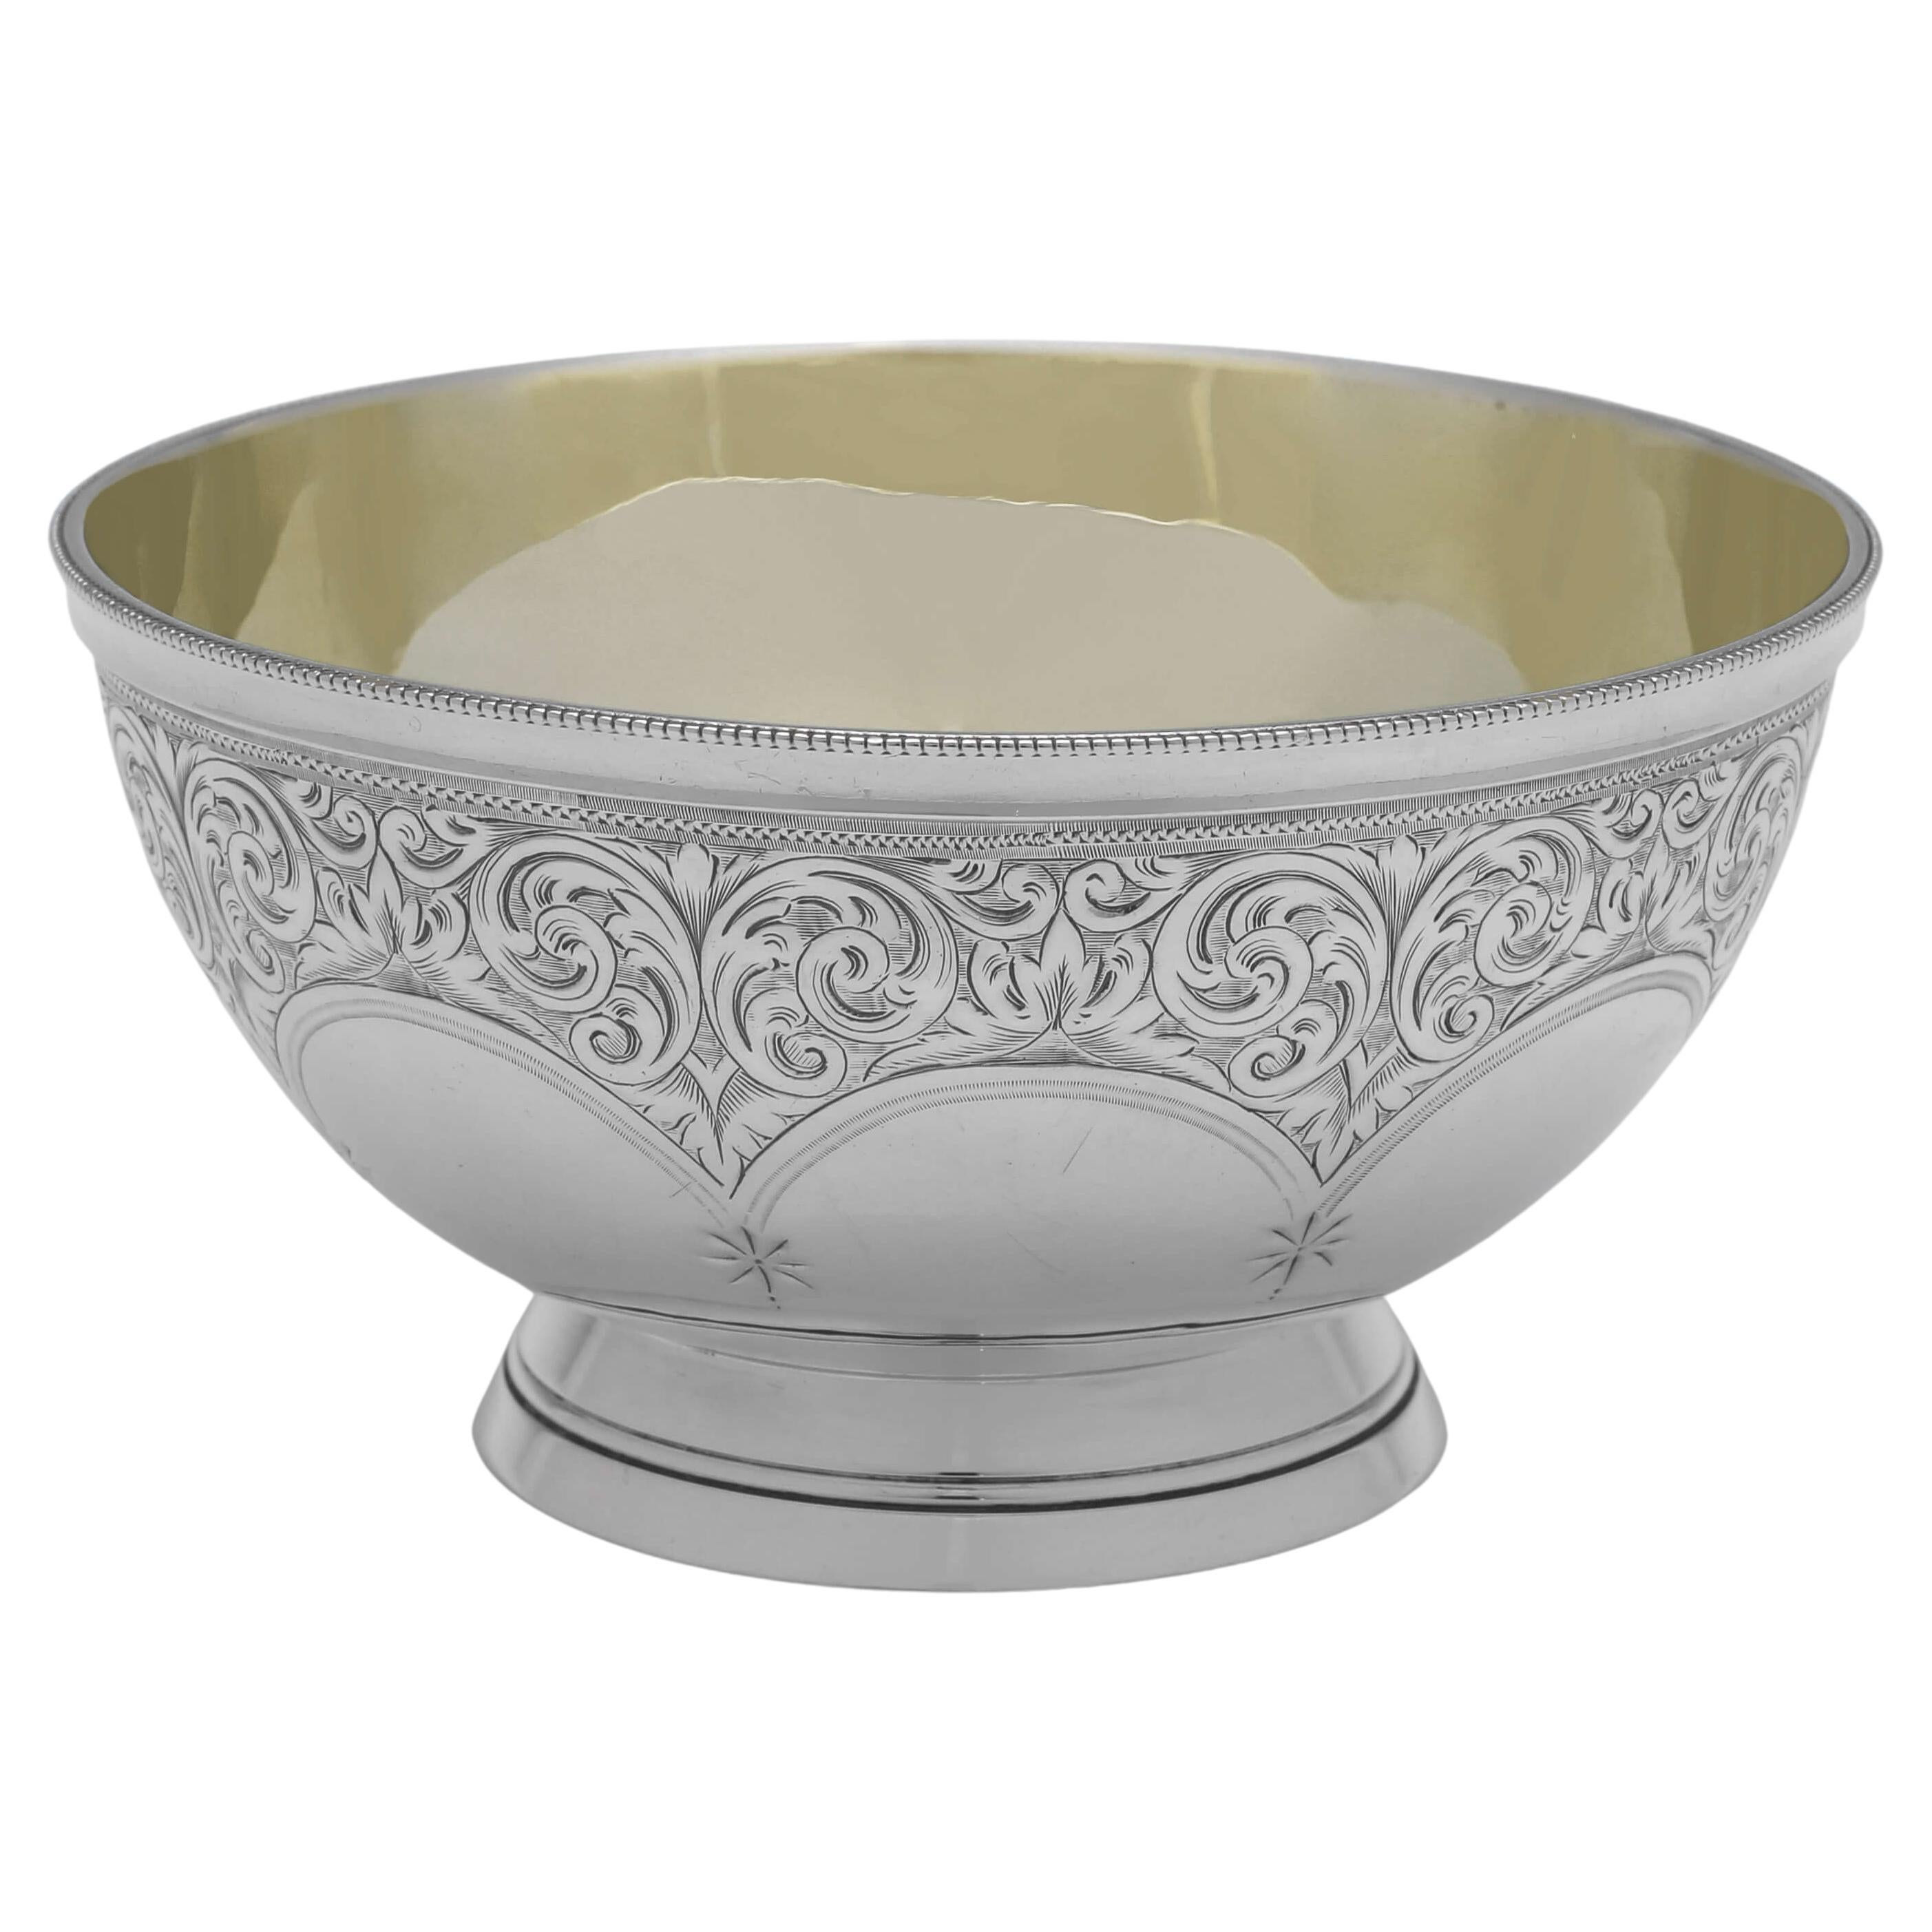 Victorian Antique Sterling Silver Engraved Bowl, London 1891 Edward Hutton